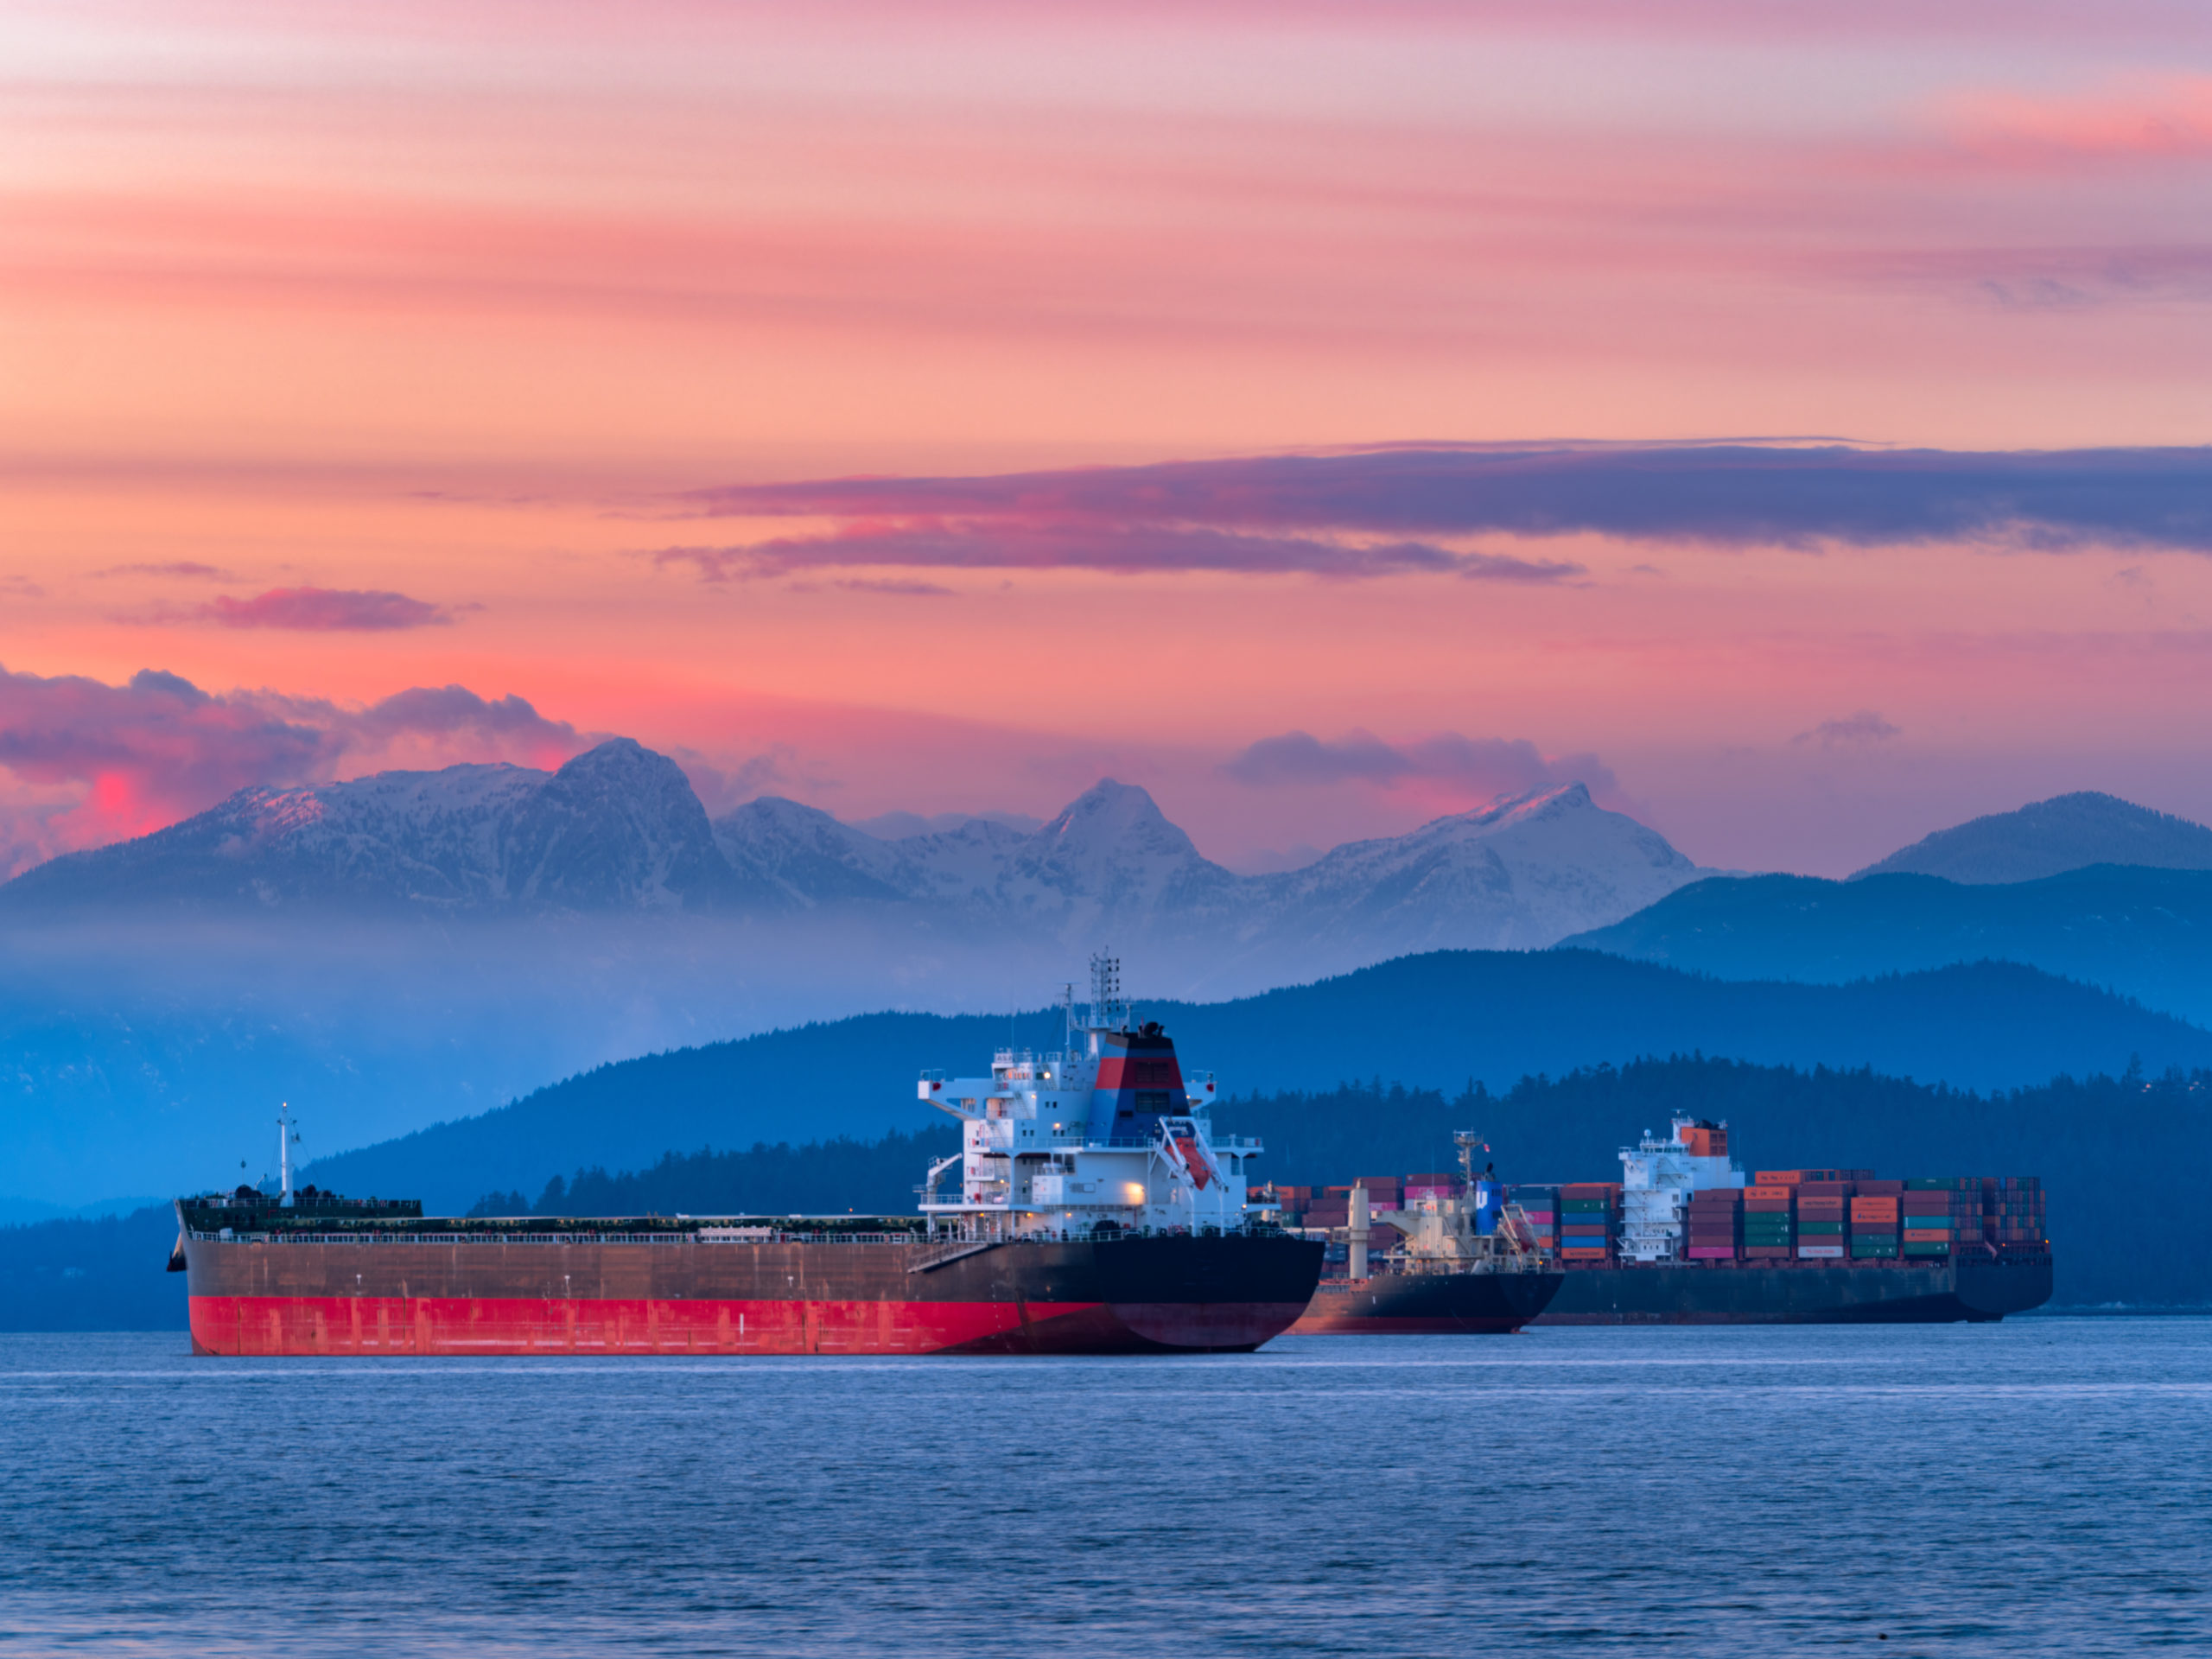 Freighters stop at the bay of Vancouver at sunset.